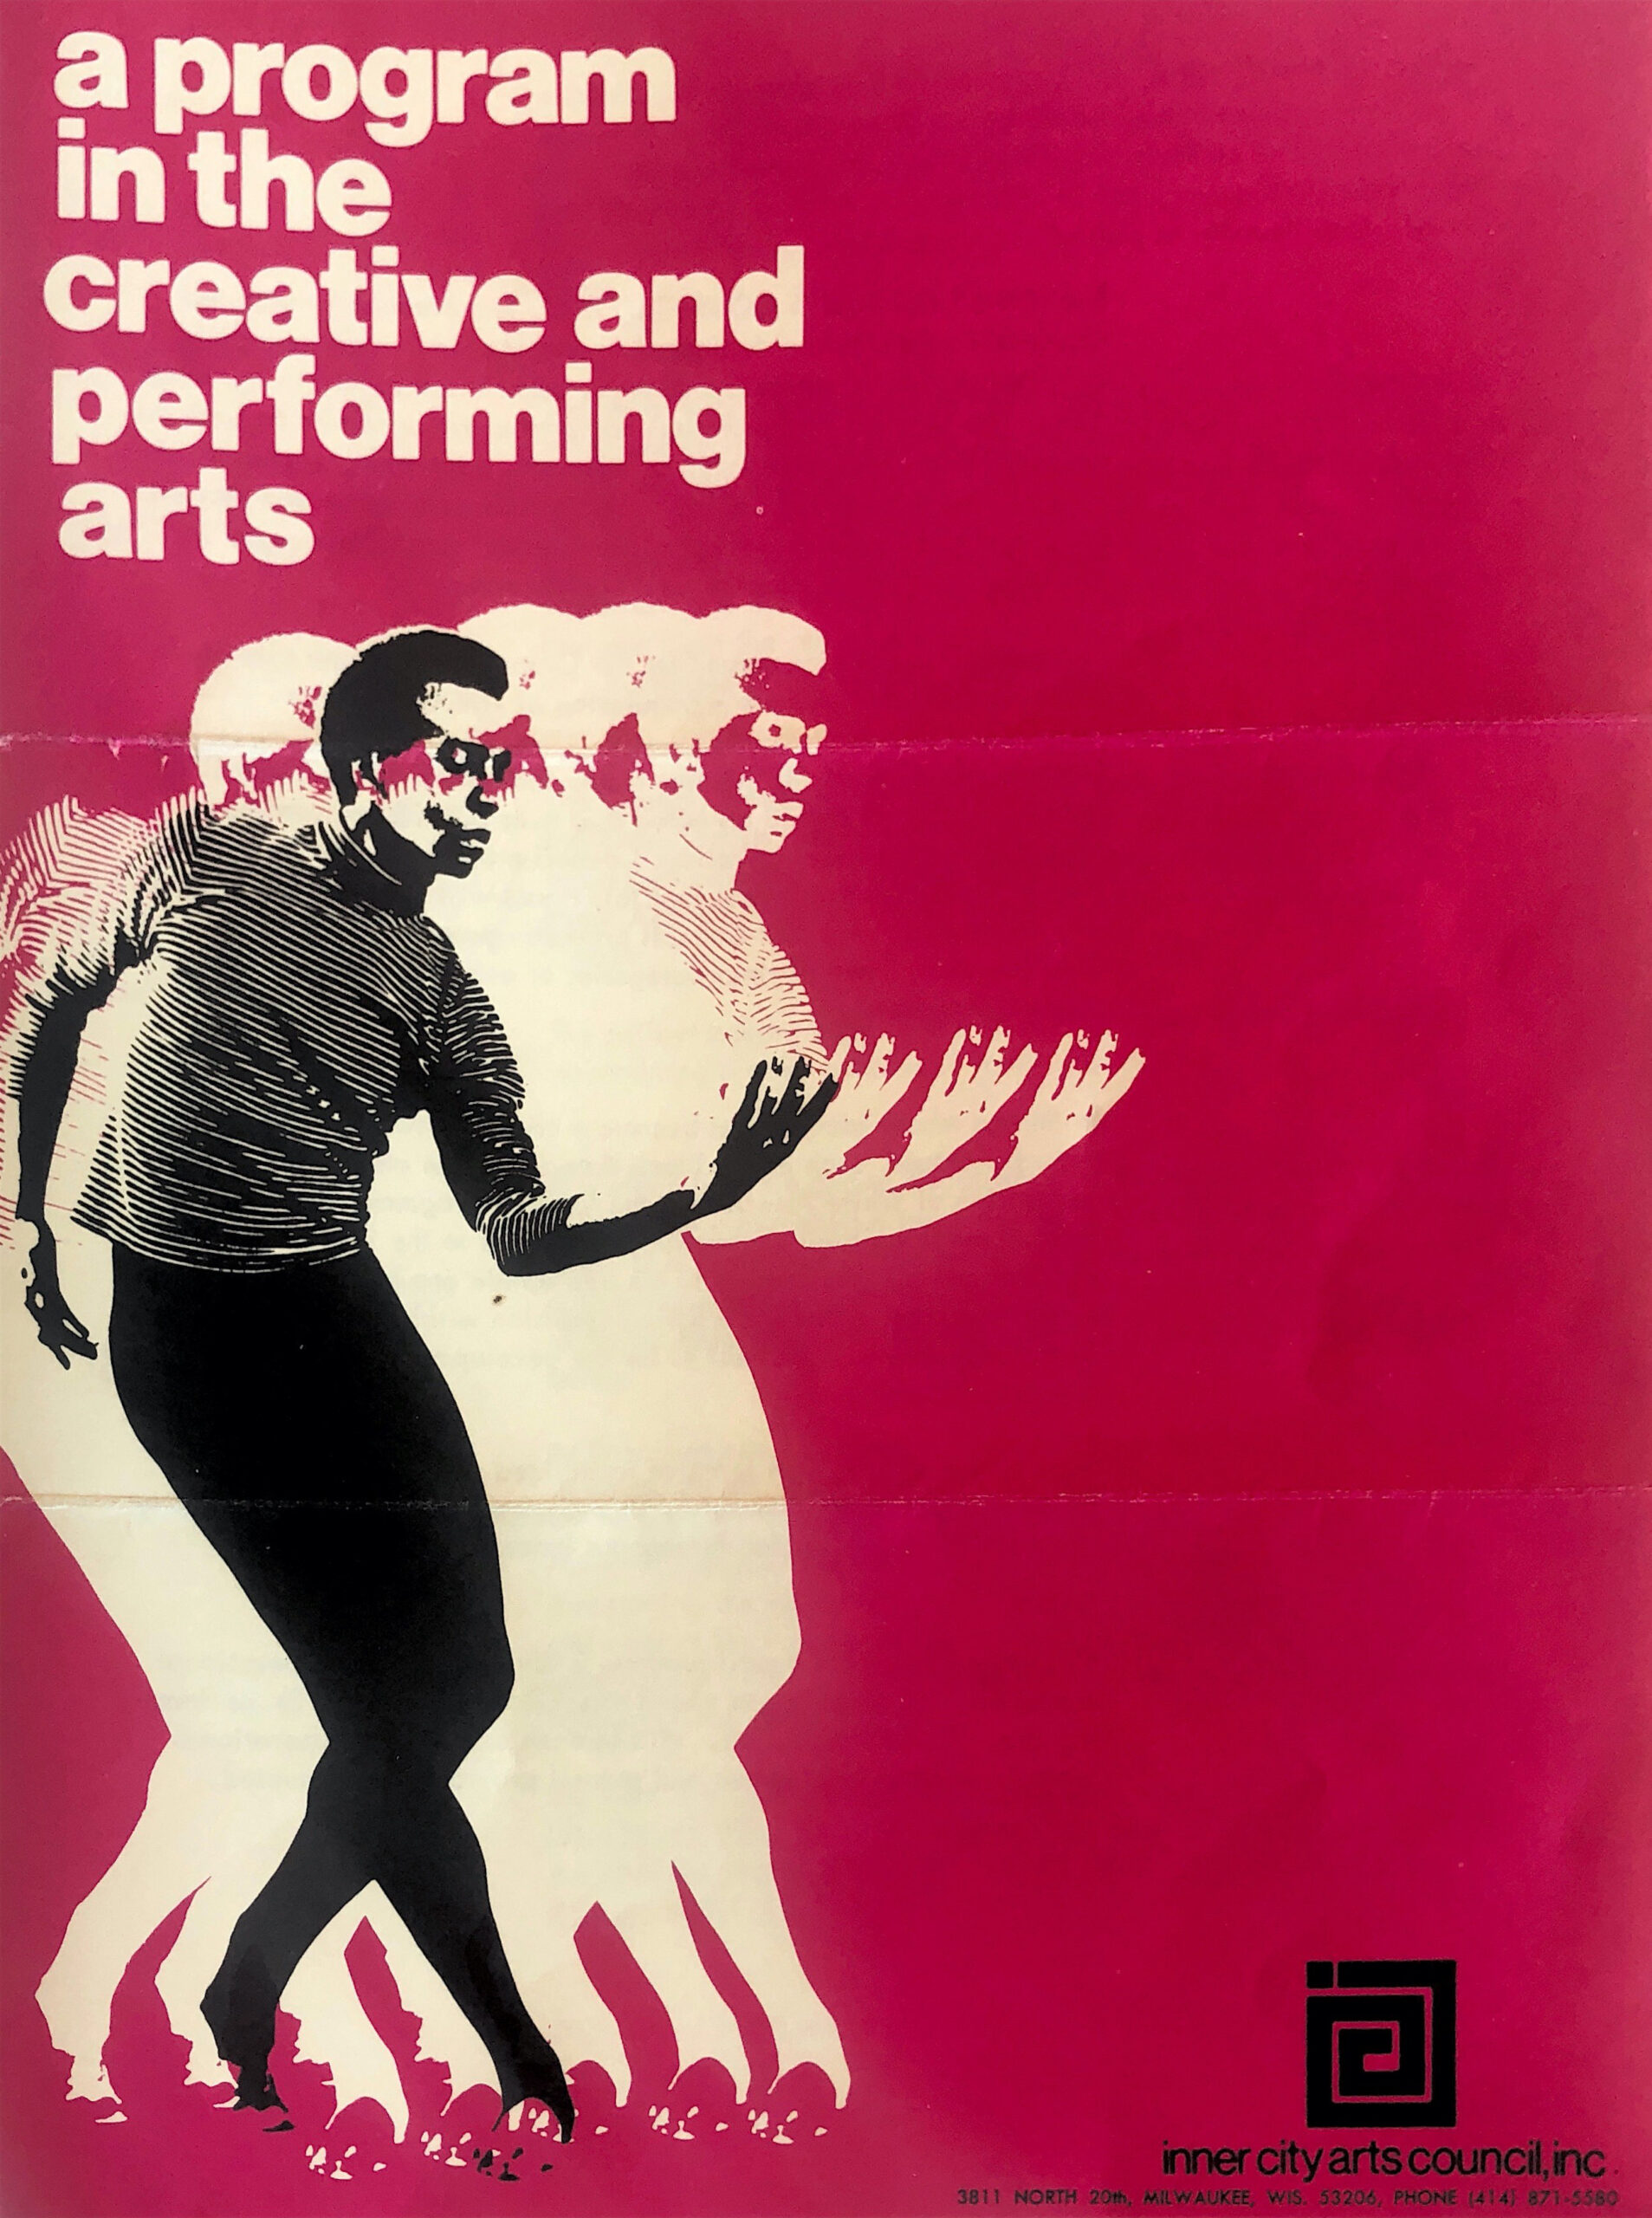 A program for a dance performance featuring a dancer on a solid red background and the words A Program in the Creative and Performing Arts